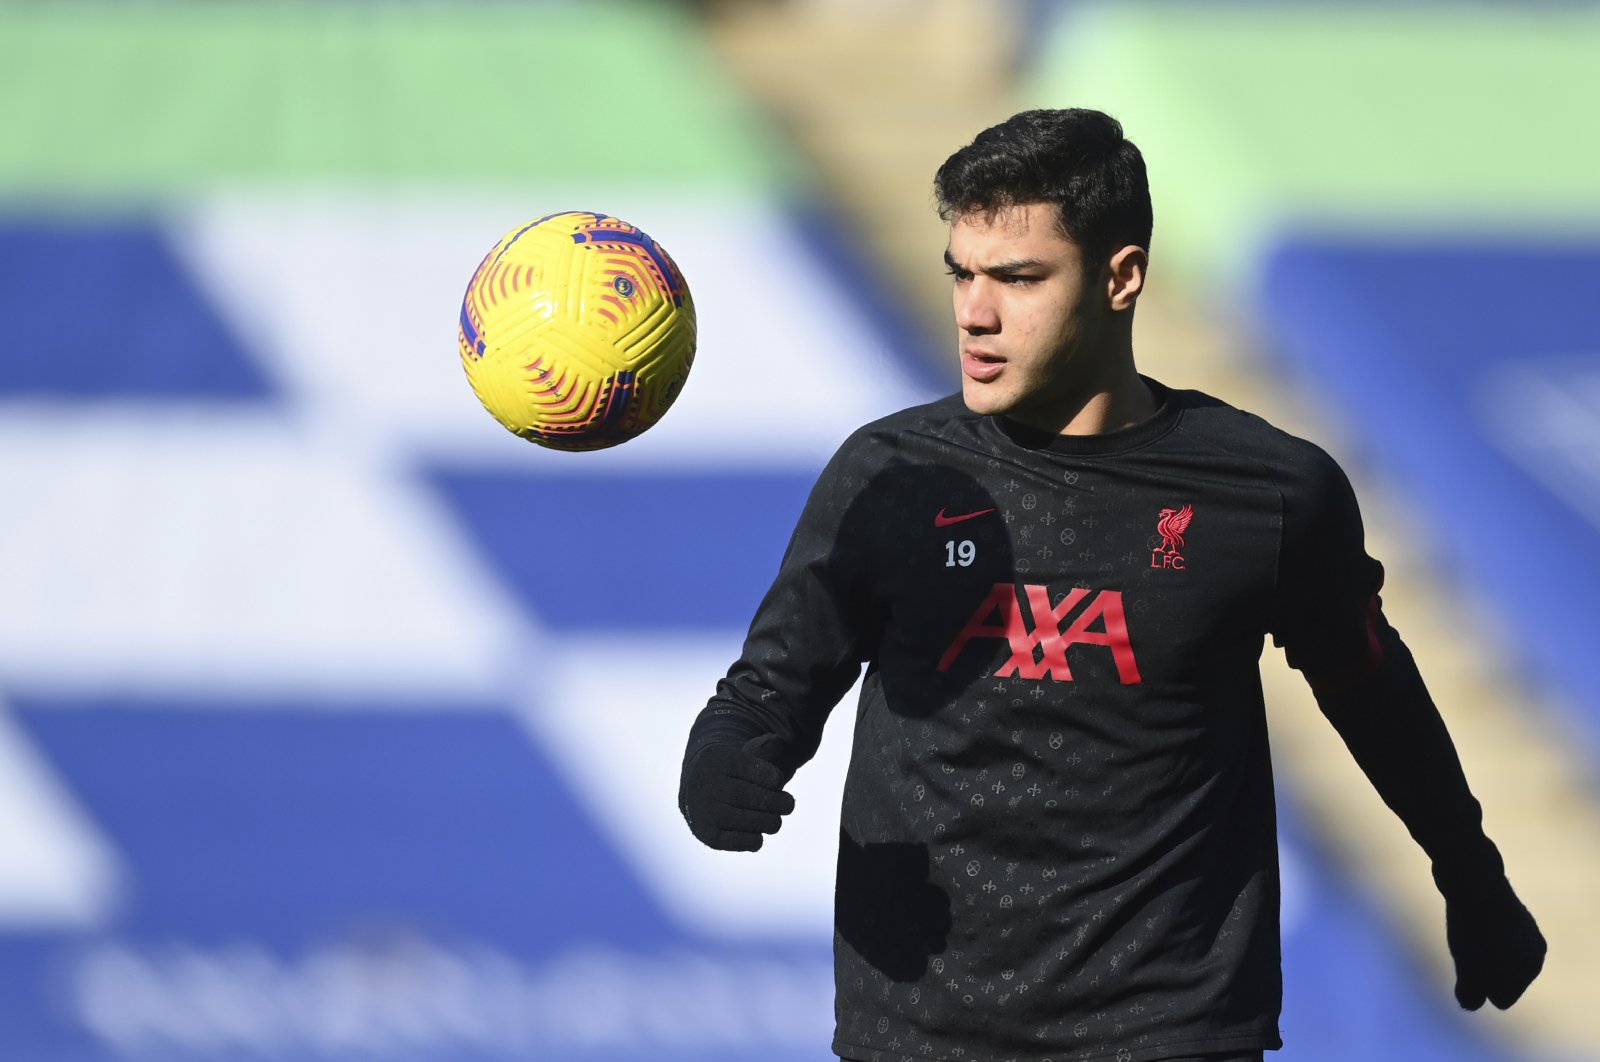 Liverpool's Ozan Kabak warms up ahead of the English Premier League match against Leicester City at the King Power Stadium in Leicester, England, Feb. 13, 2021. (AP Photo)